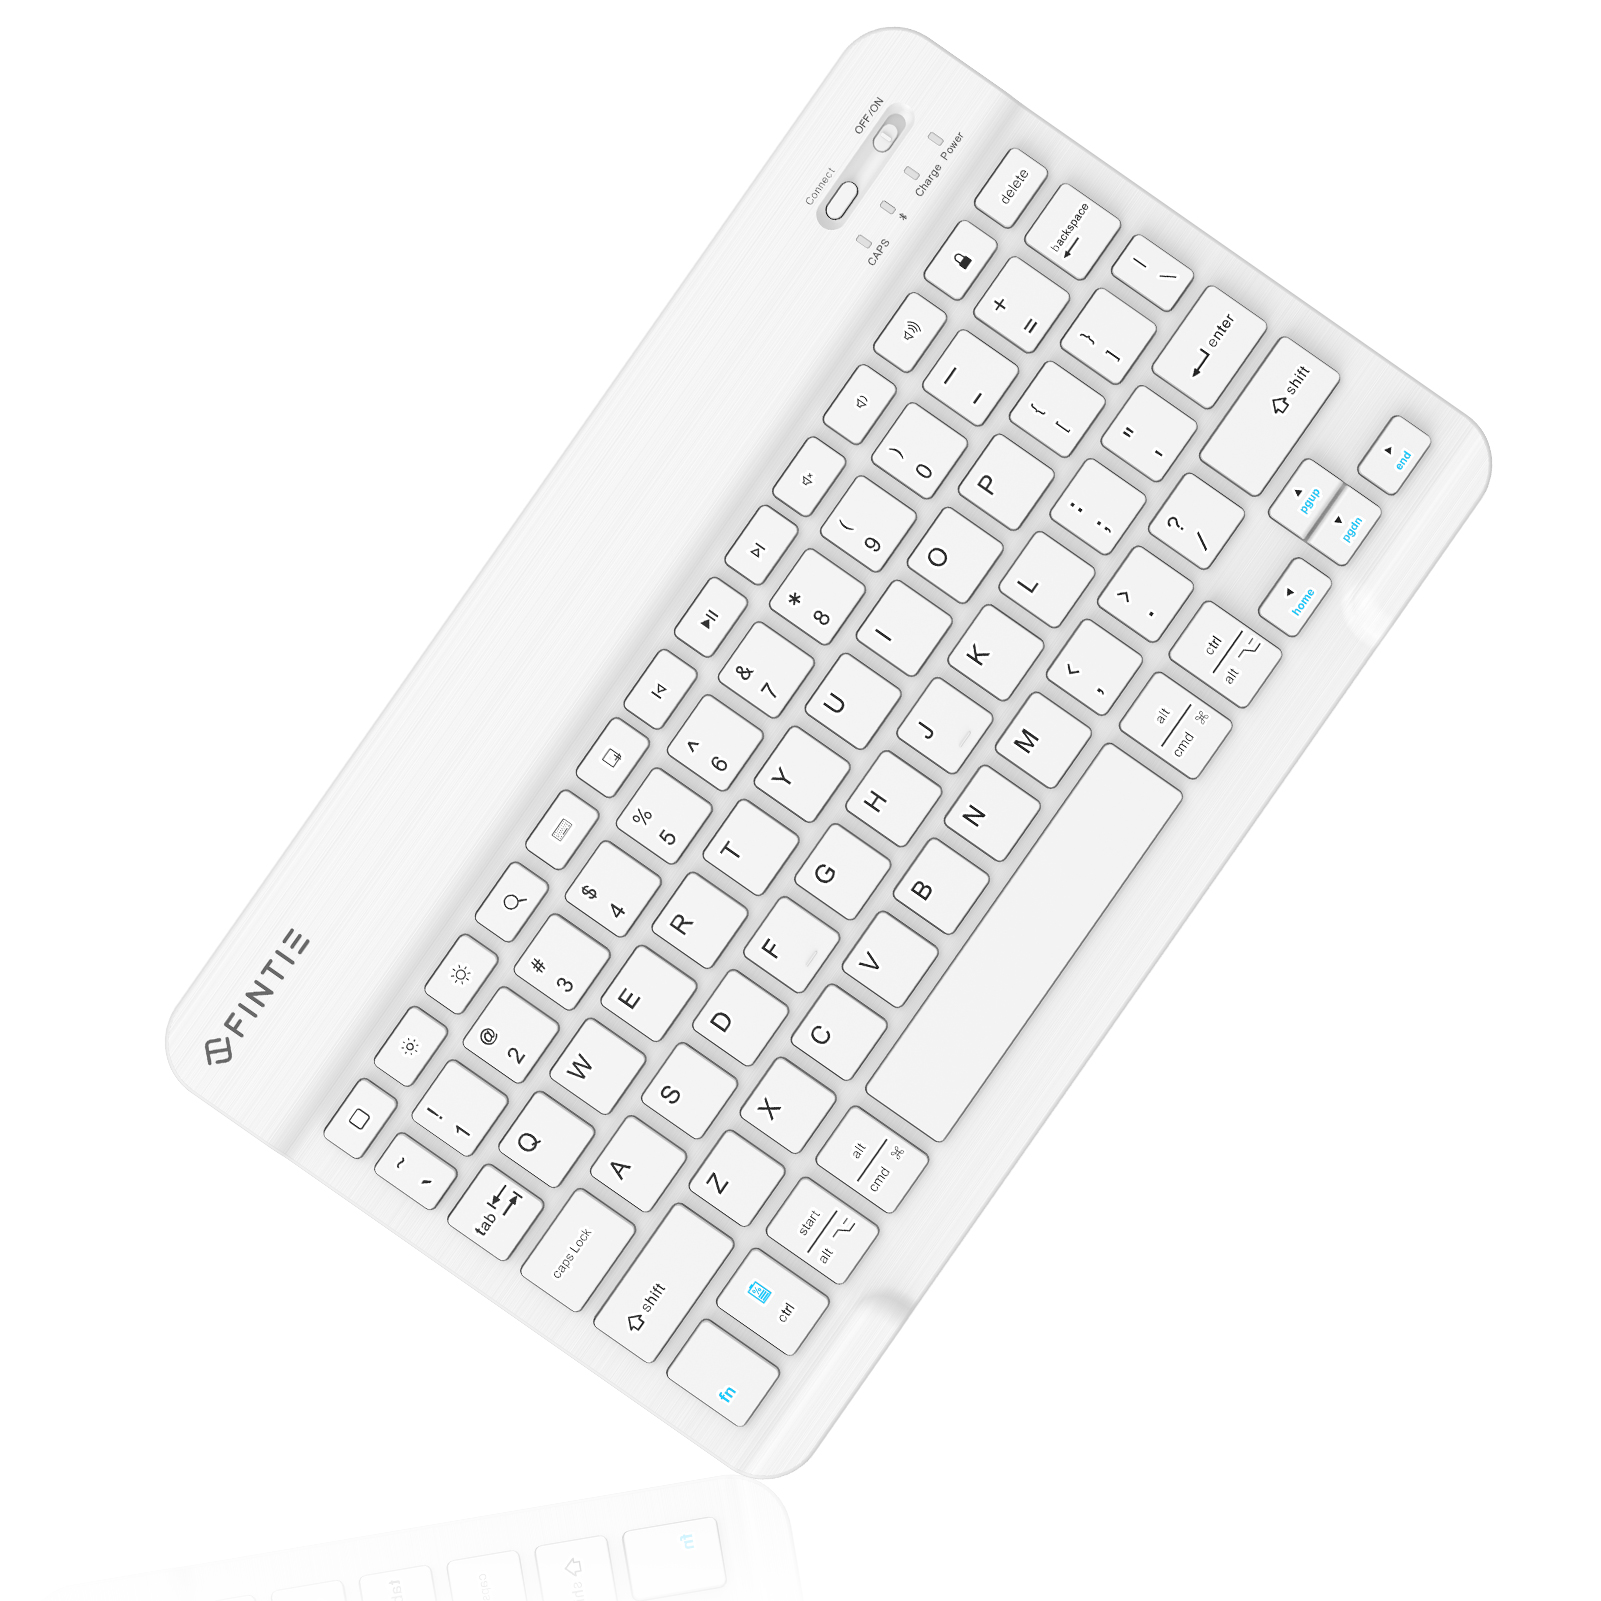 Fintie 10-Inch Ultrathin (4mm) Wireless Bluetooth Keyboard for iPad Samsung Tablet, iPhone Smartphone, iOS, Android Tablets Phone, White - image 1 of 8